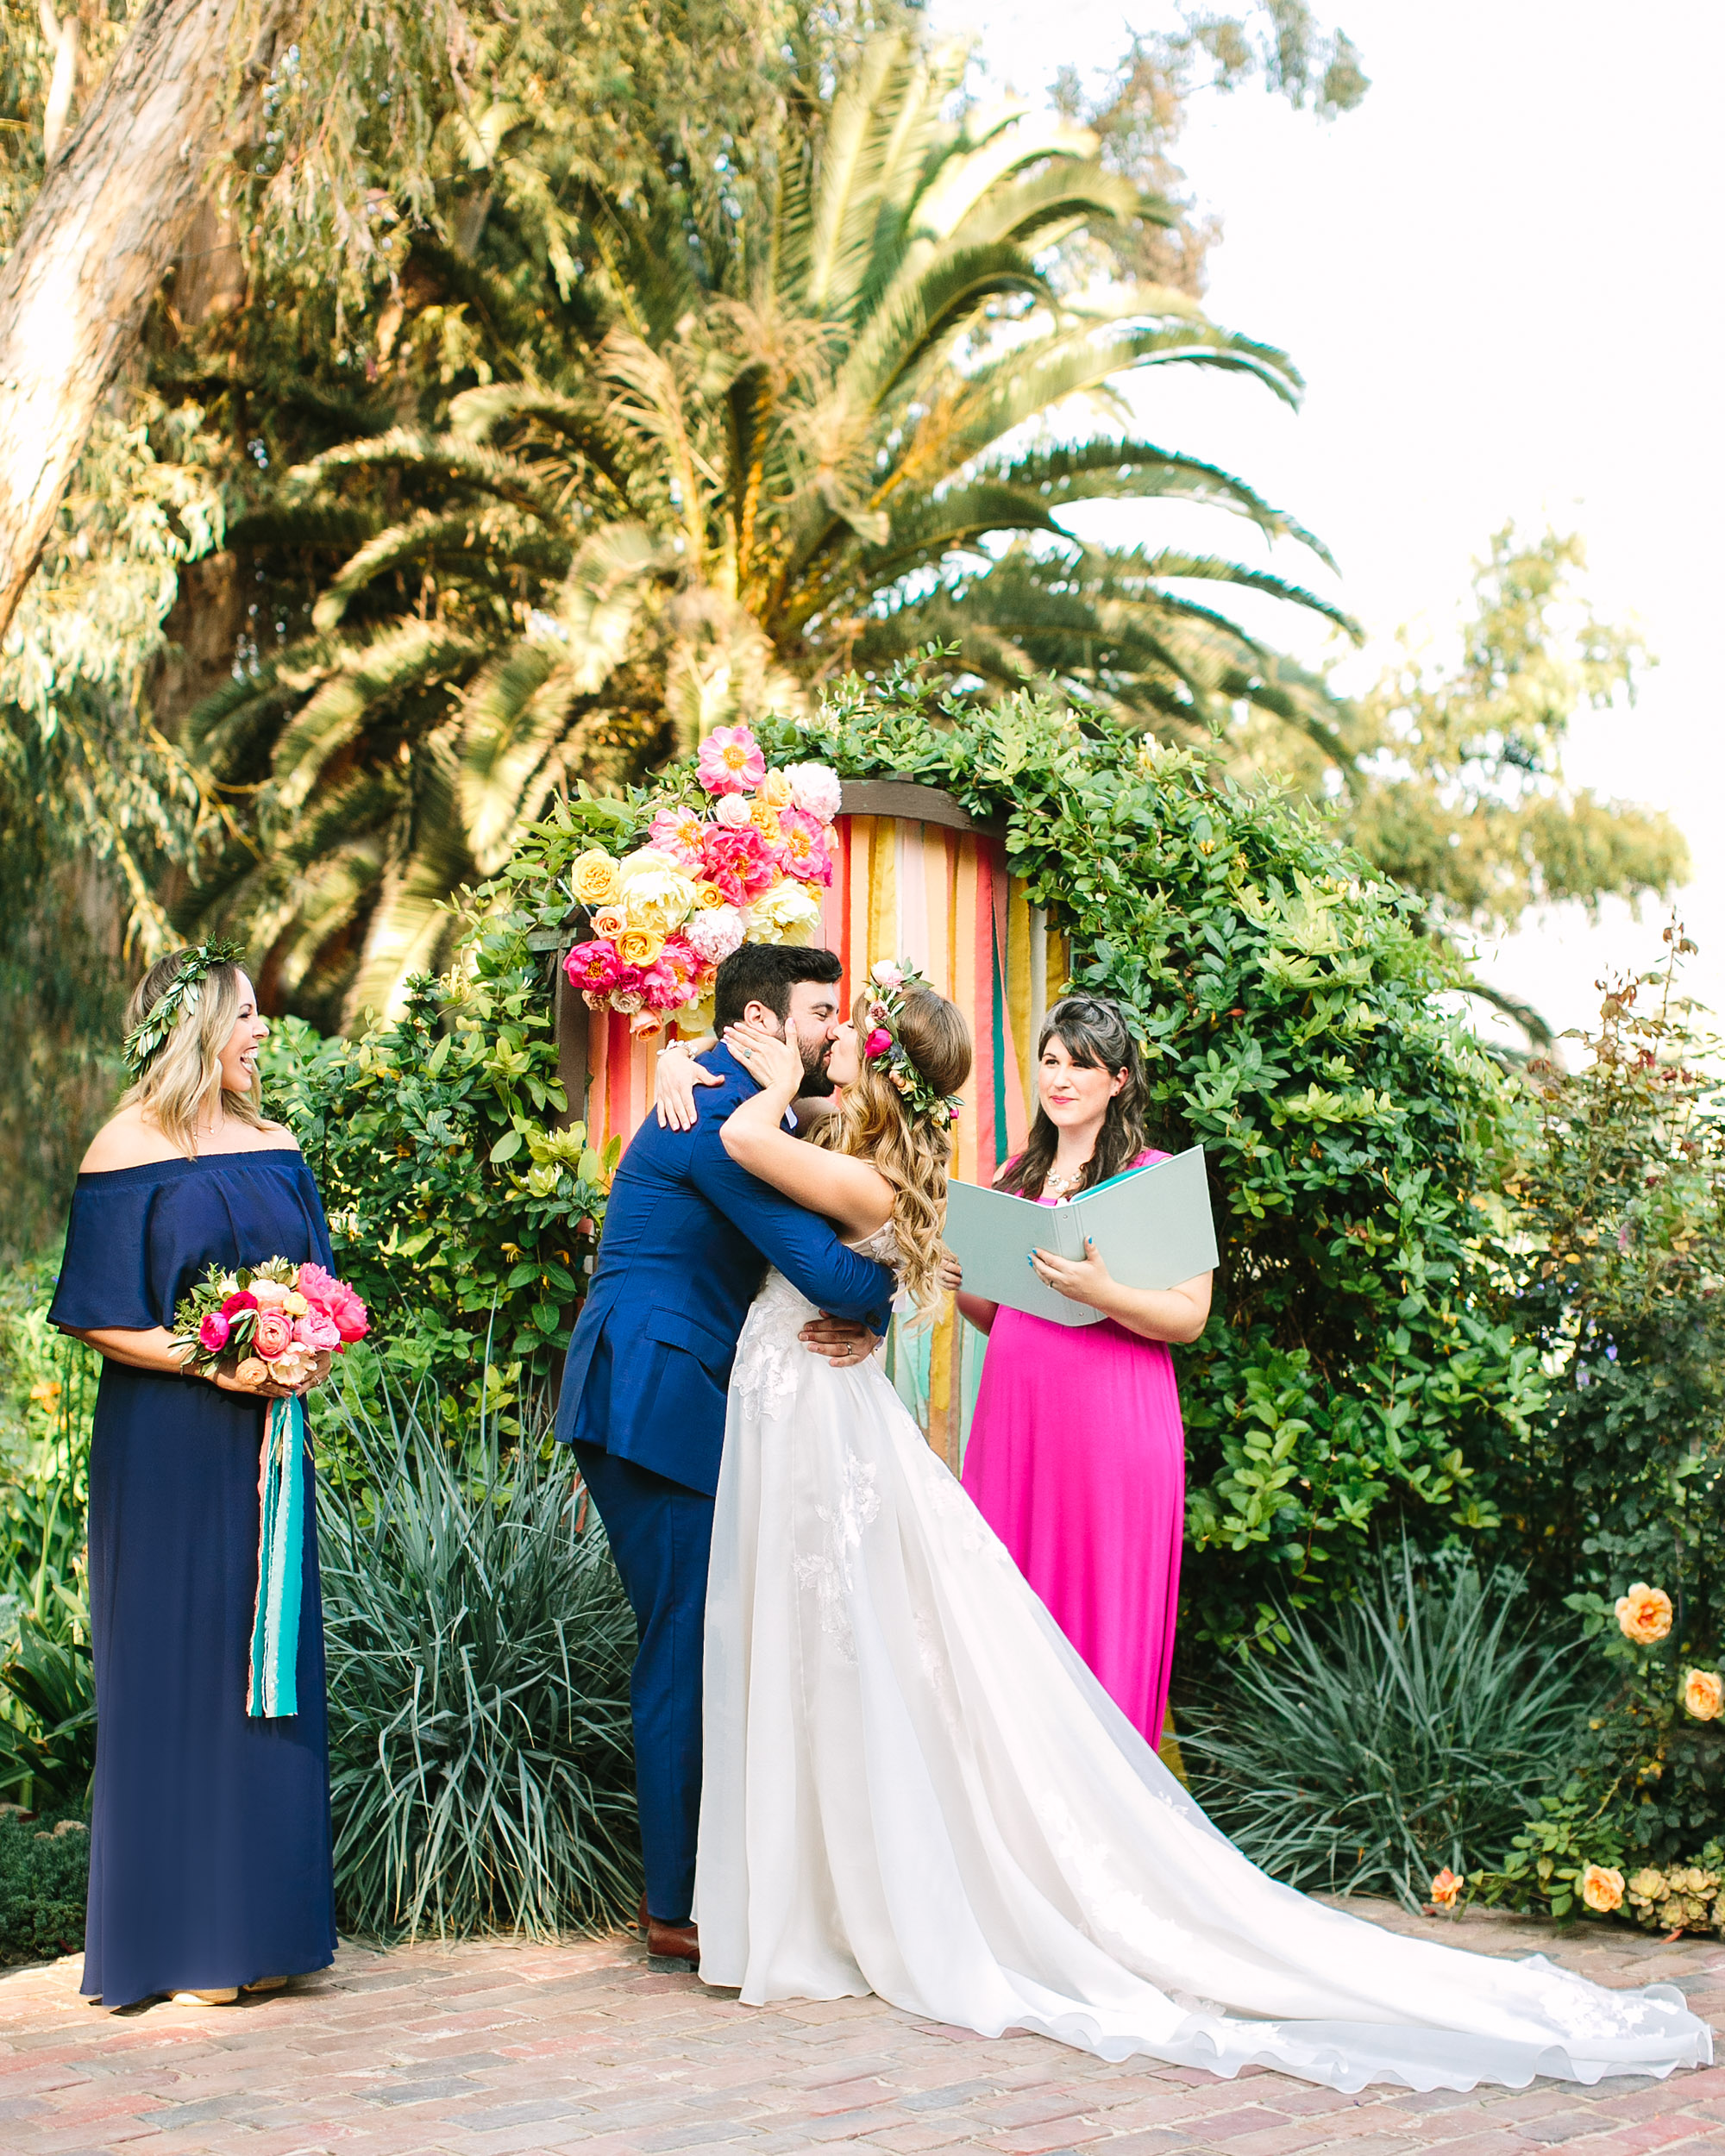 Mary Mike S Colorful California Wedding With Musical Accents